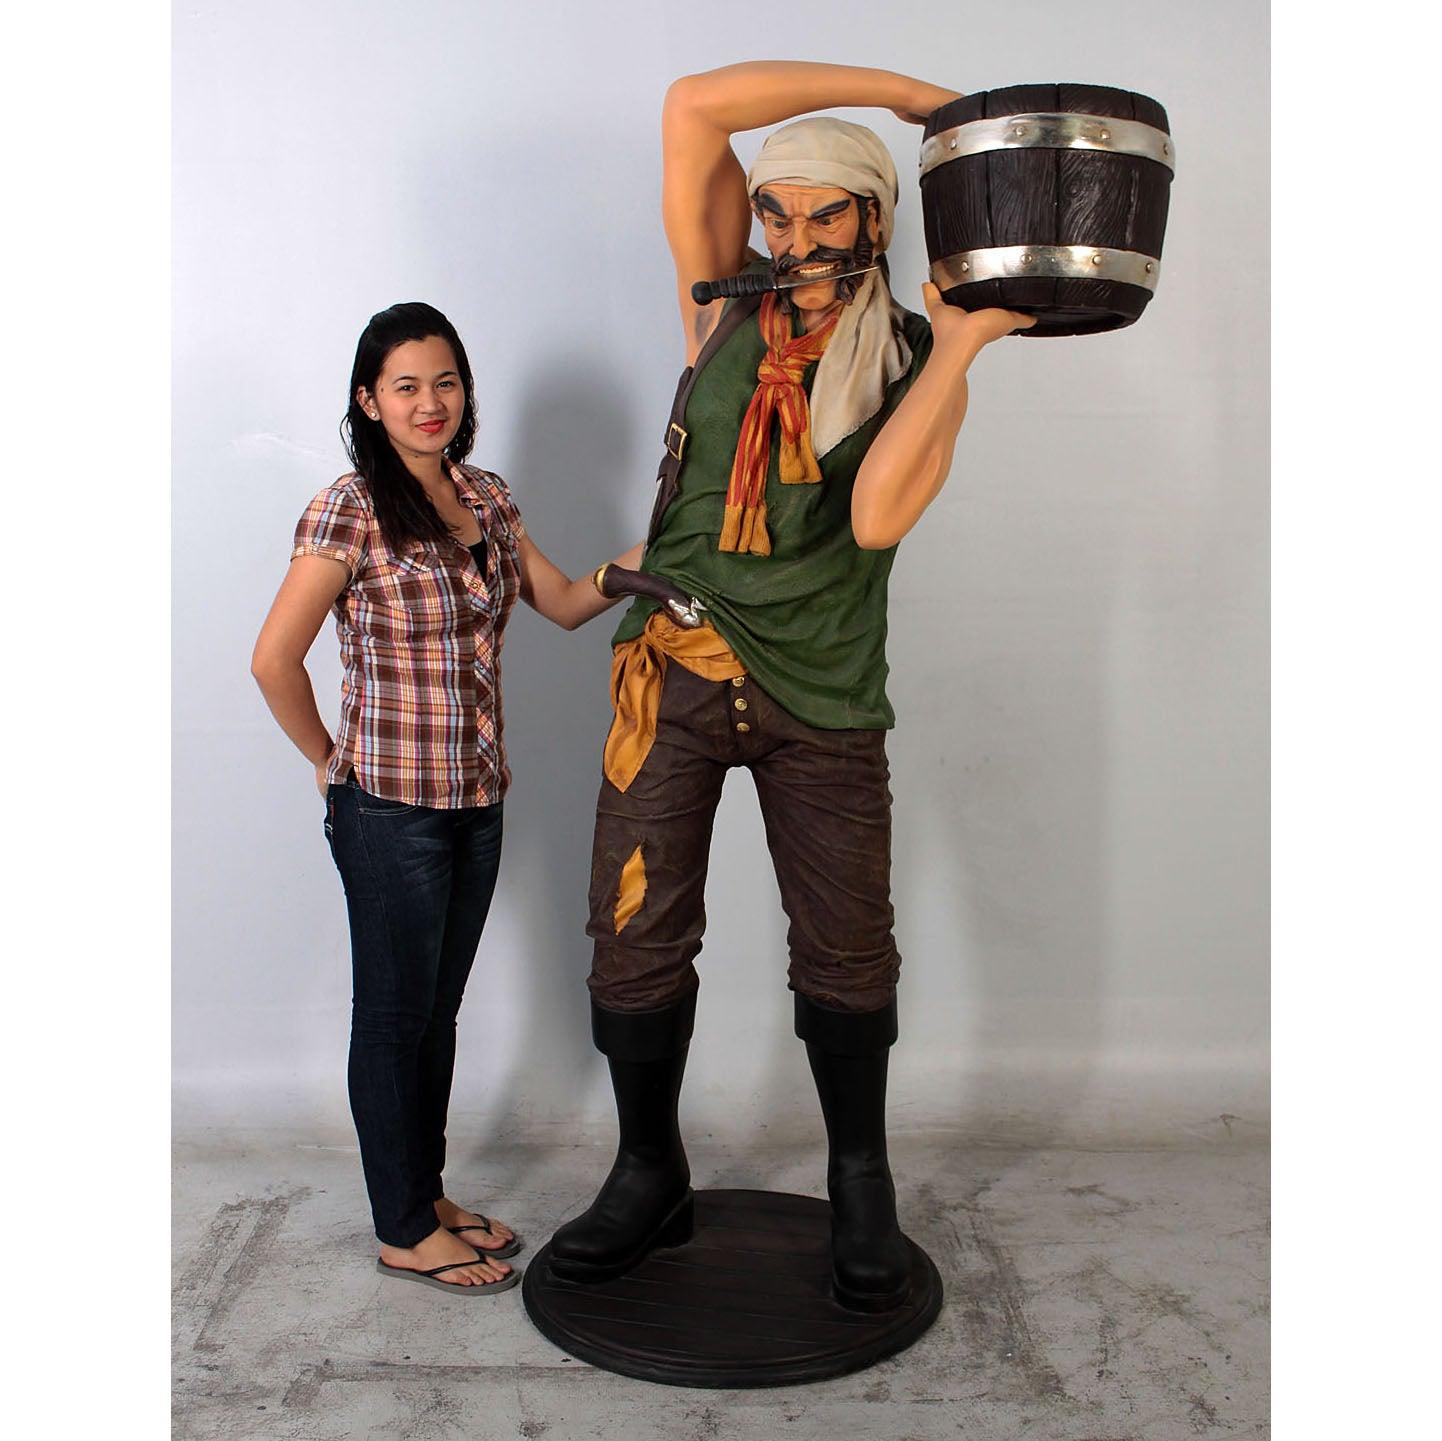 Pirate Holding Bucket Life Size Statue